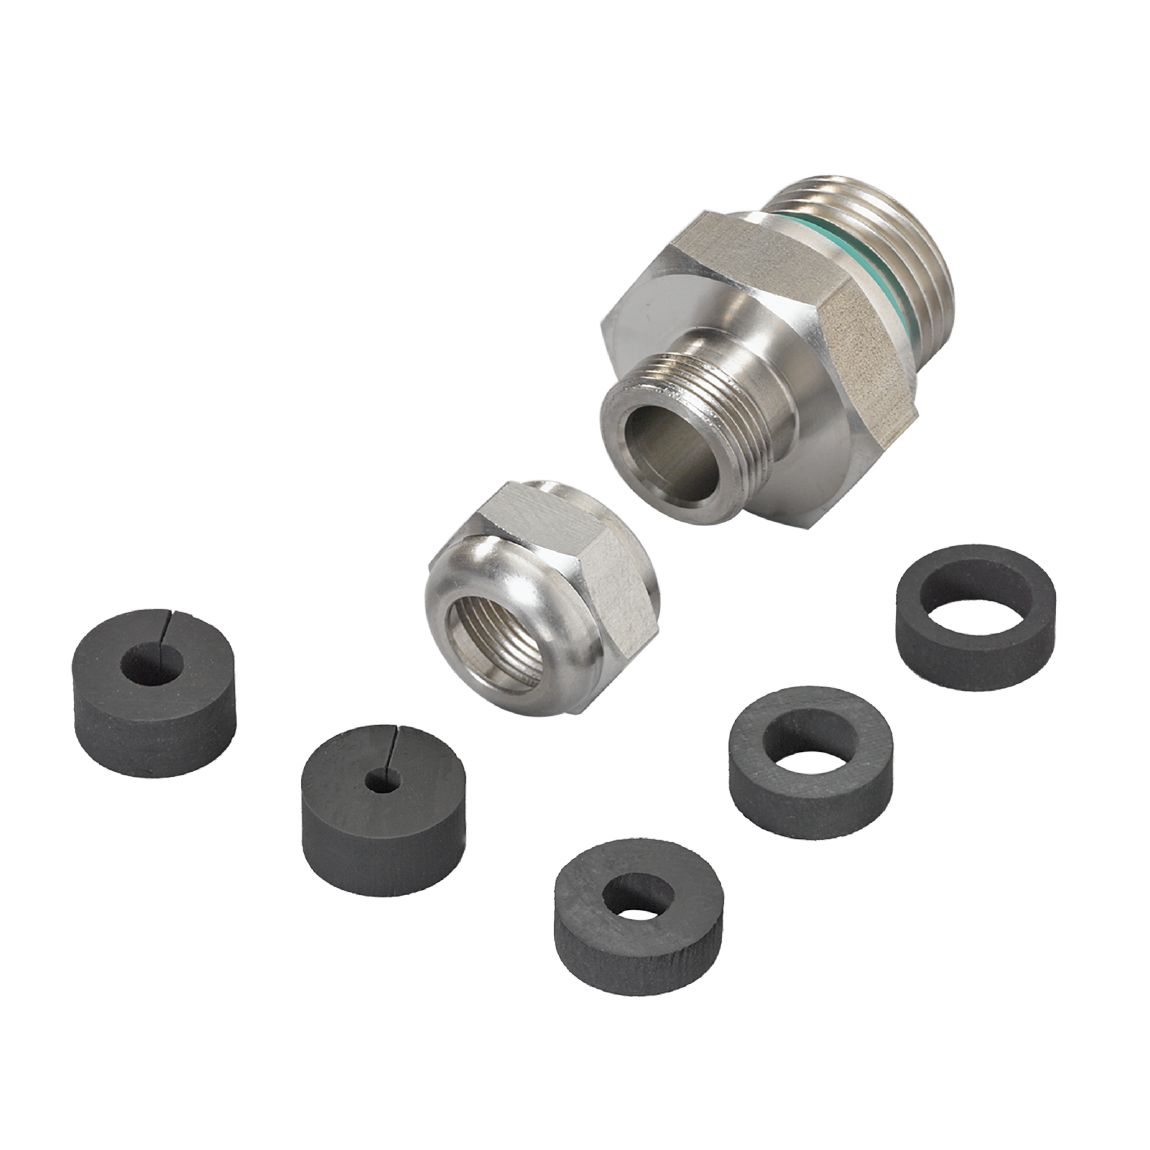 E30018 - Clamp fitting for process sensors - ifm